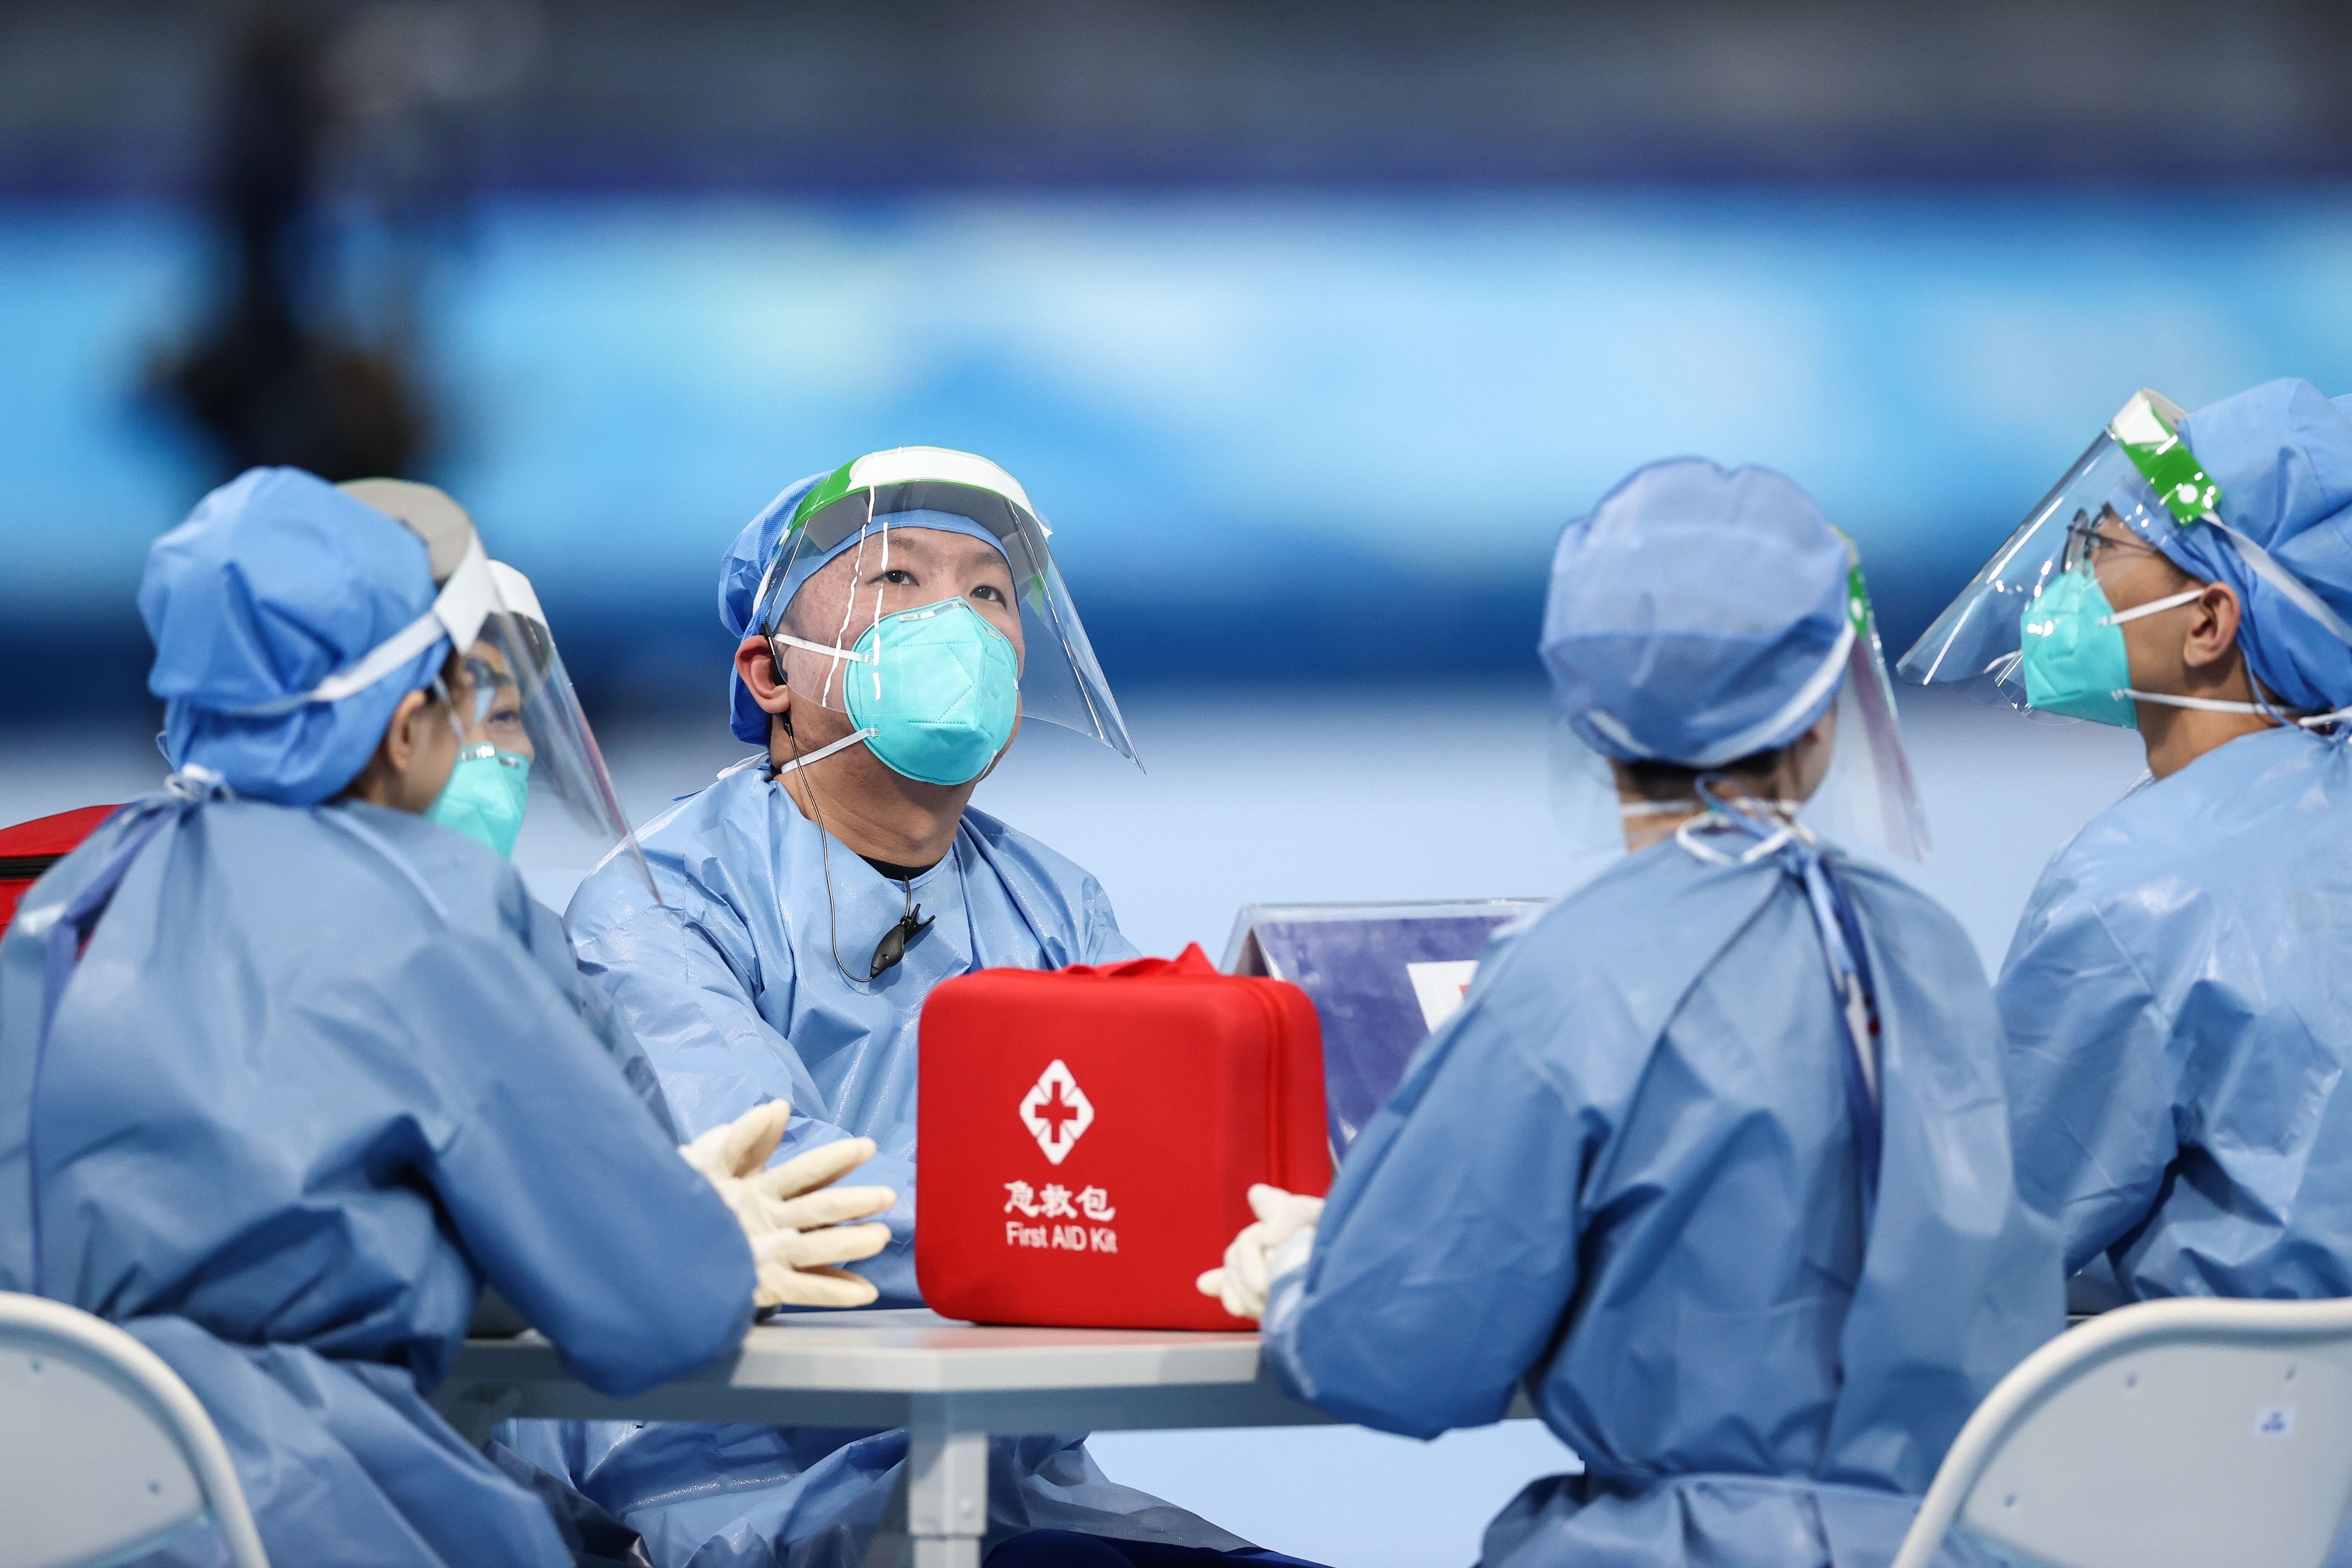 ealthcare workers are seen during women's 3000m speed skating race during the Beijing 2022 Winter Olympic Games at the National Speed Skating Oval .